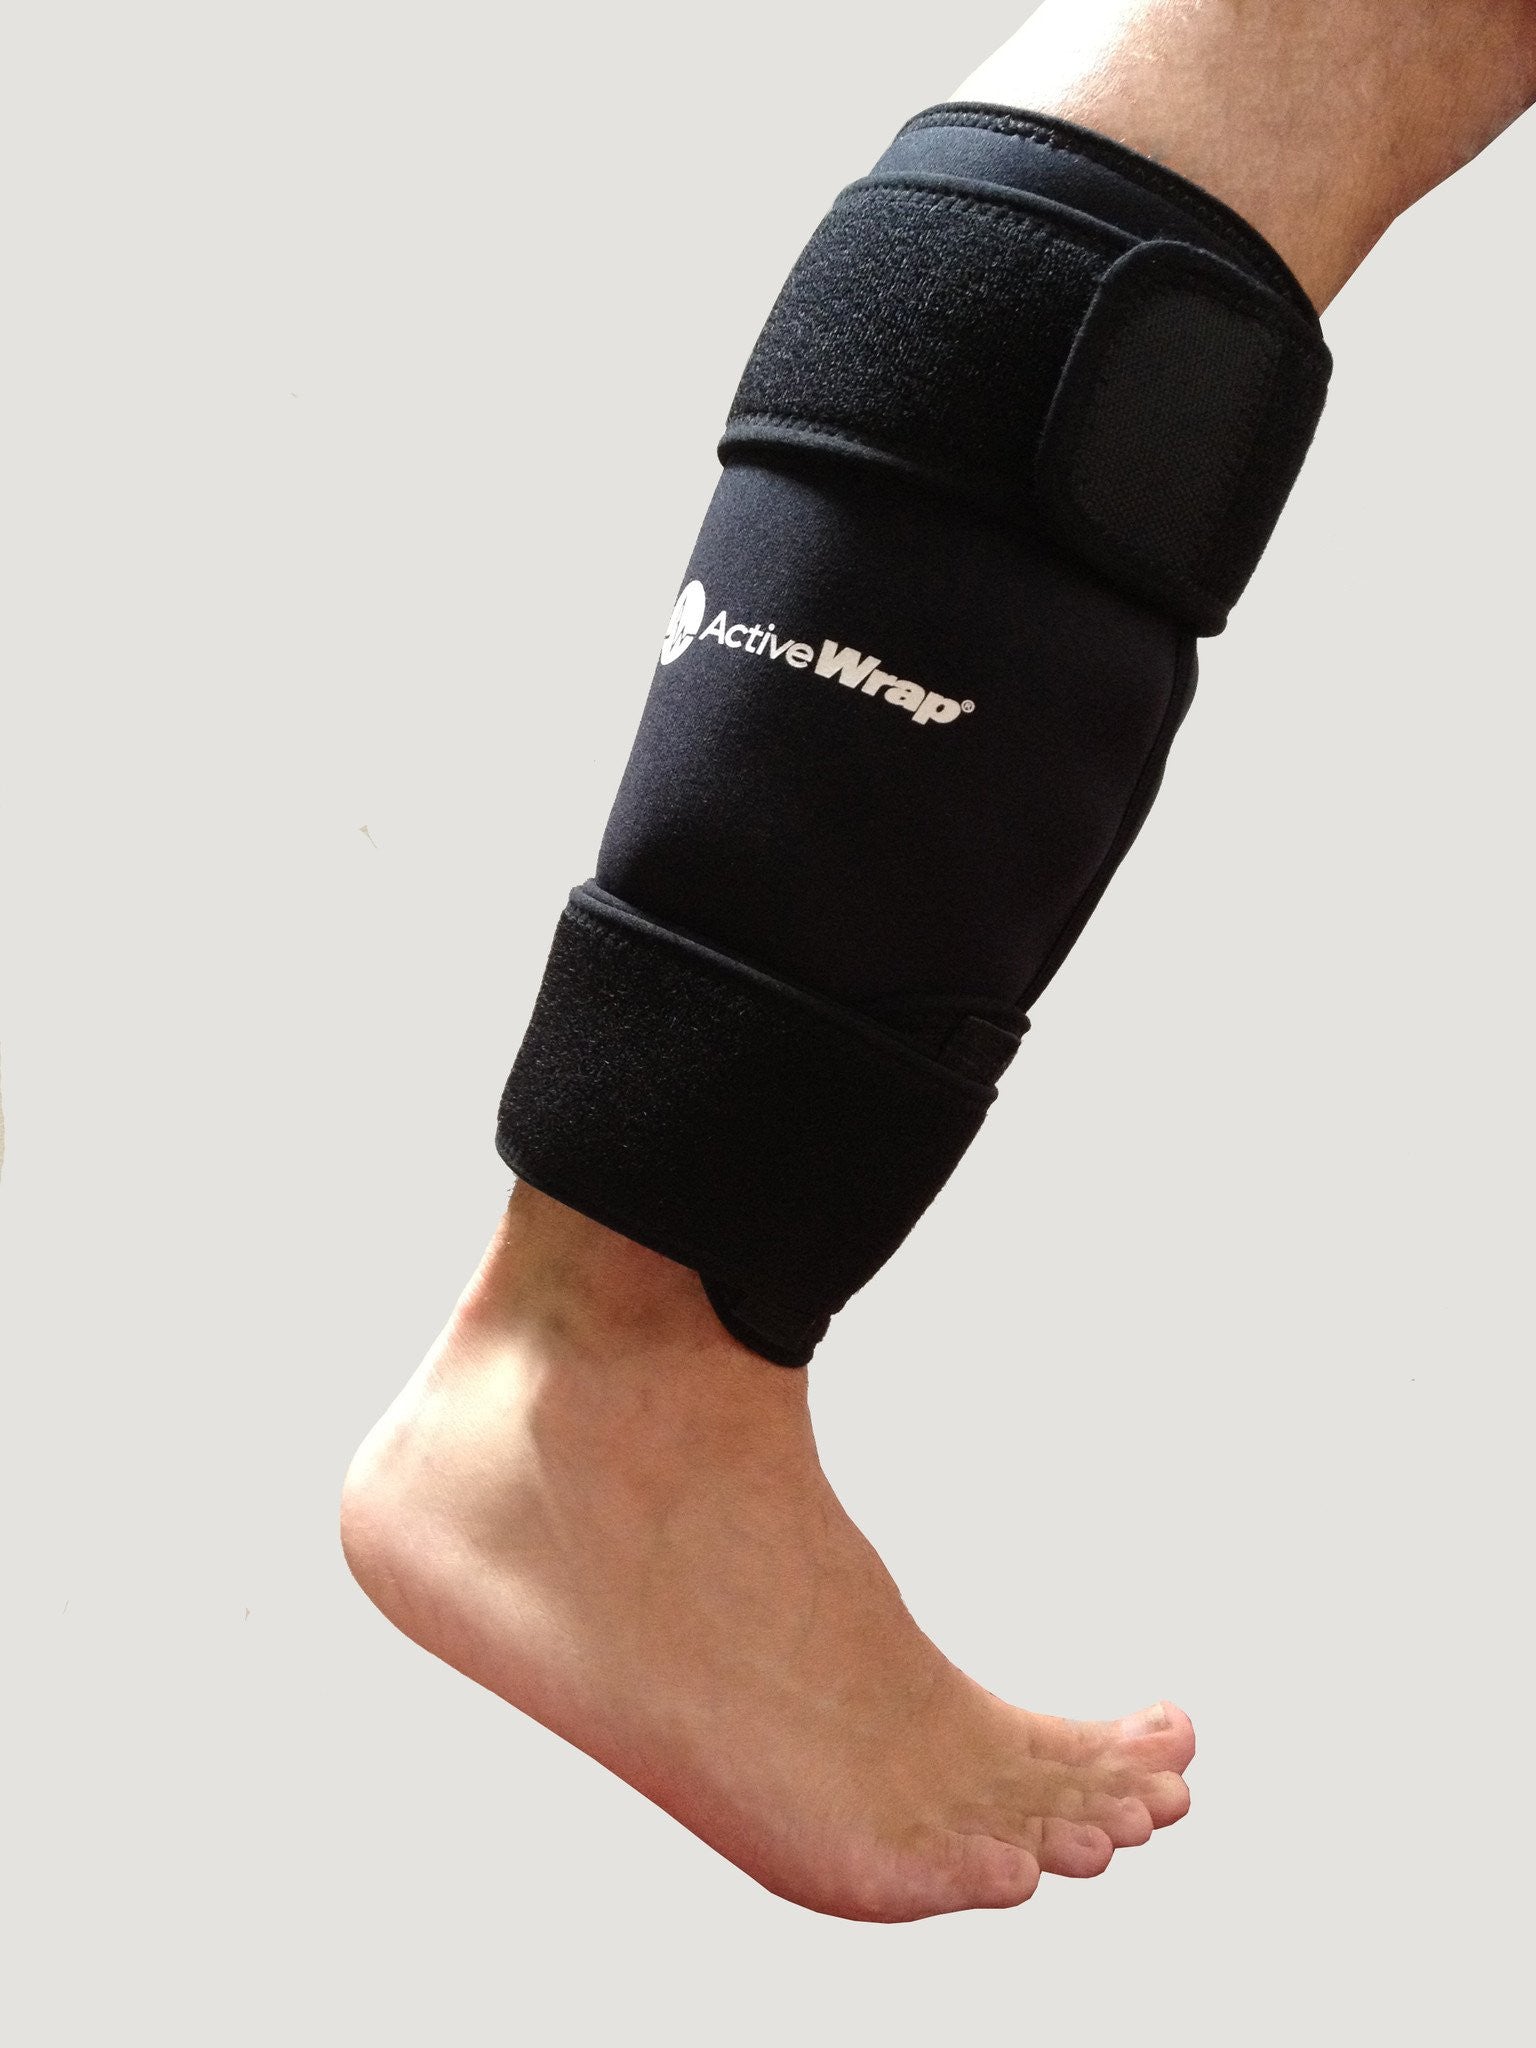 Ice wrap for shin, gastrocnemius or calf injuries